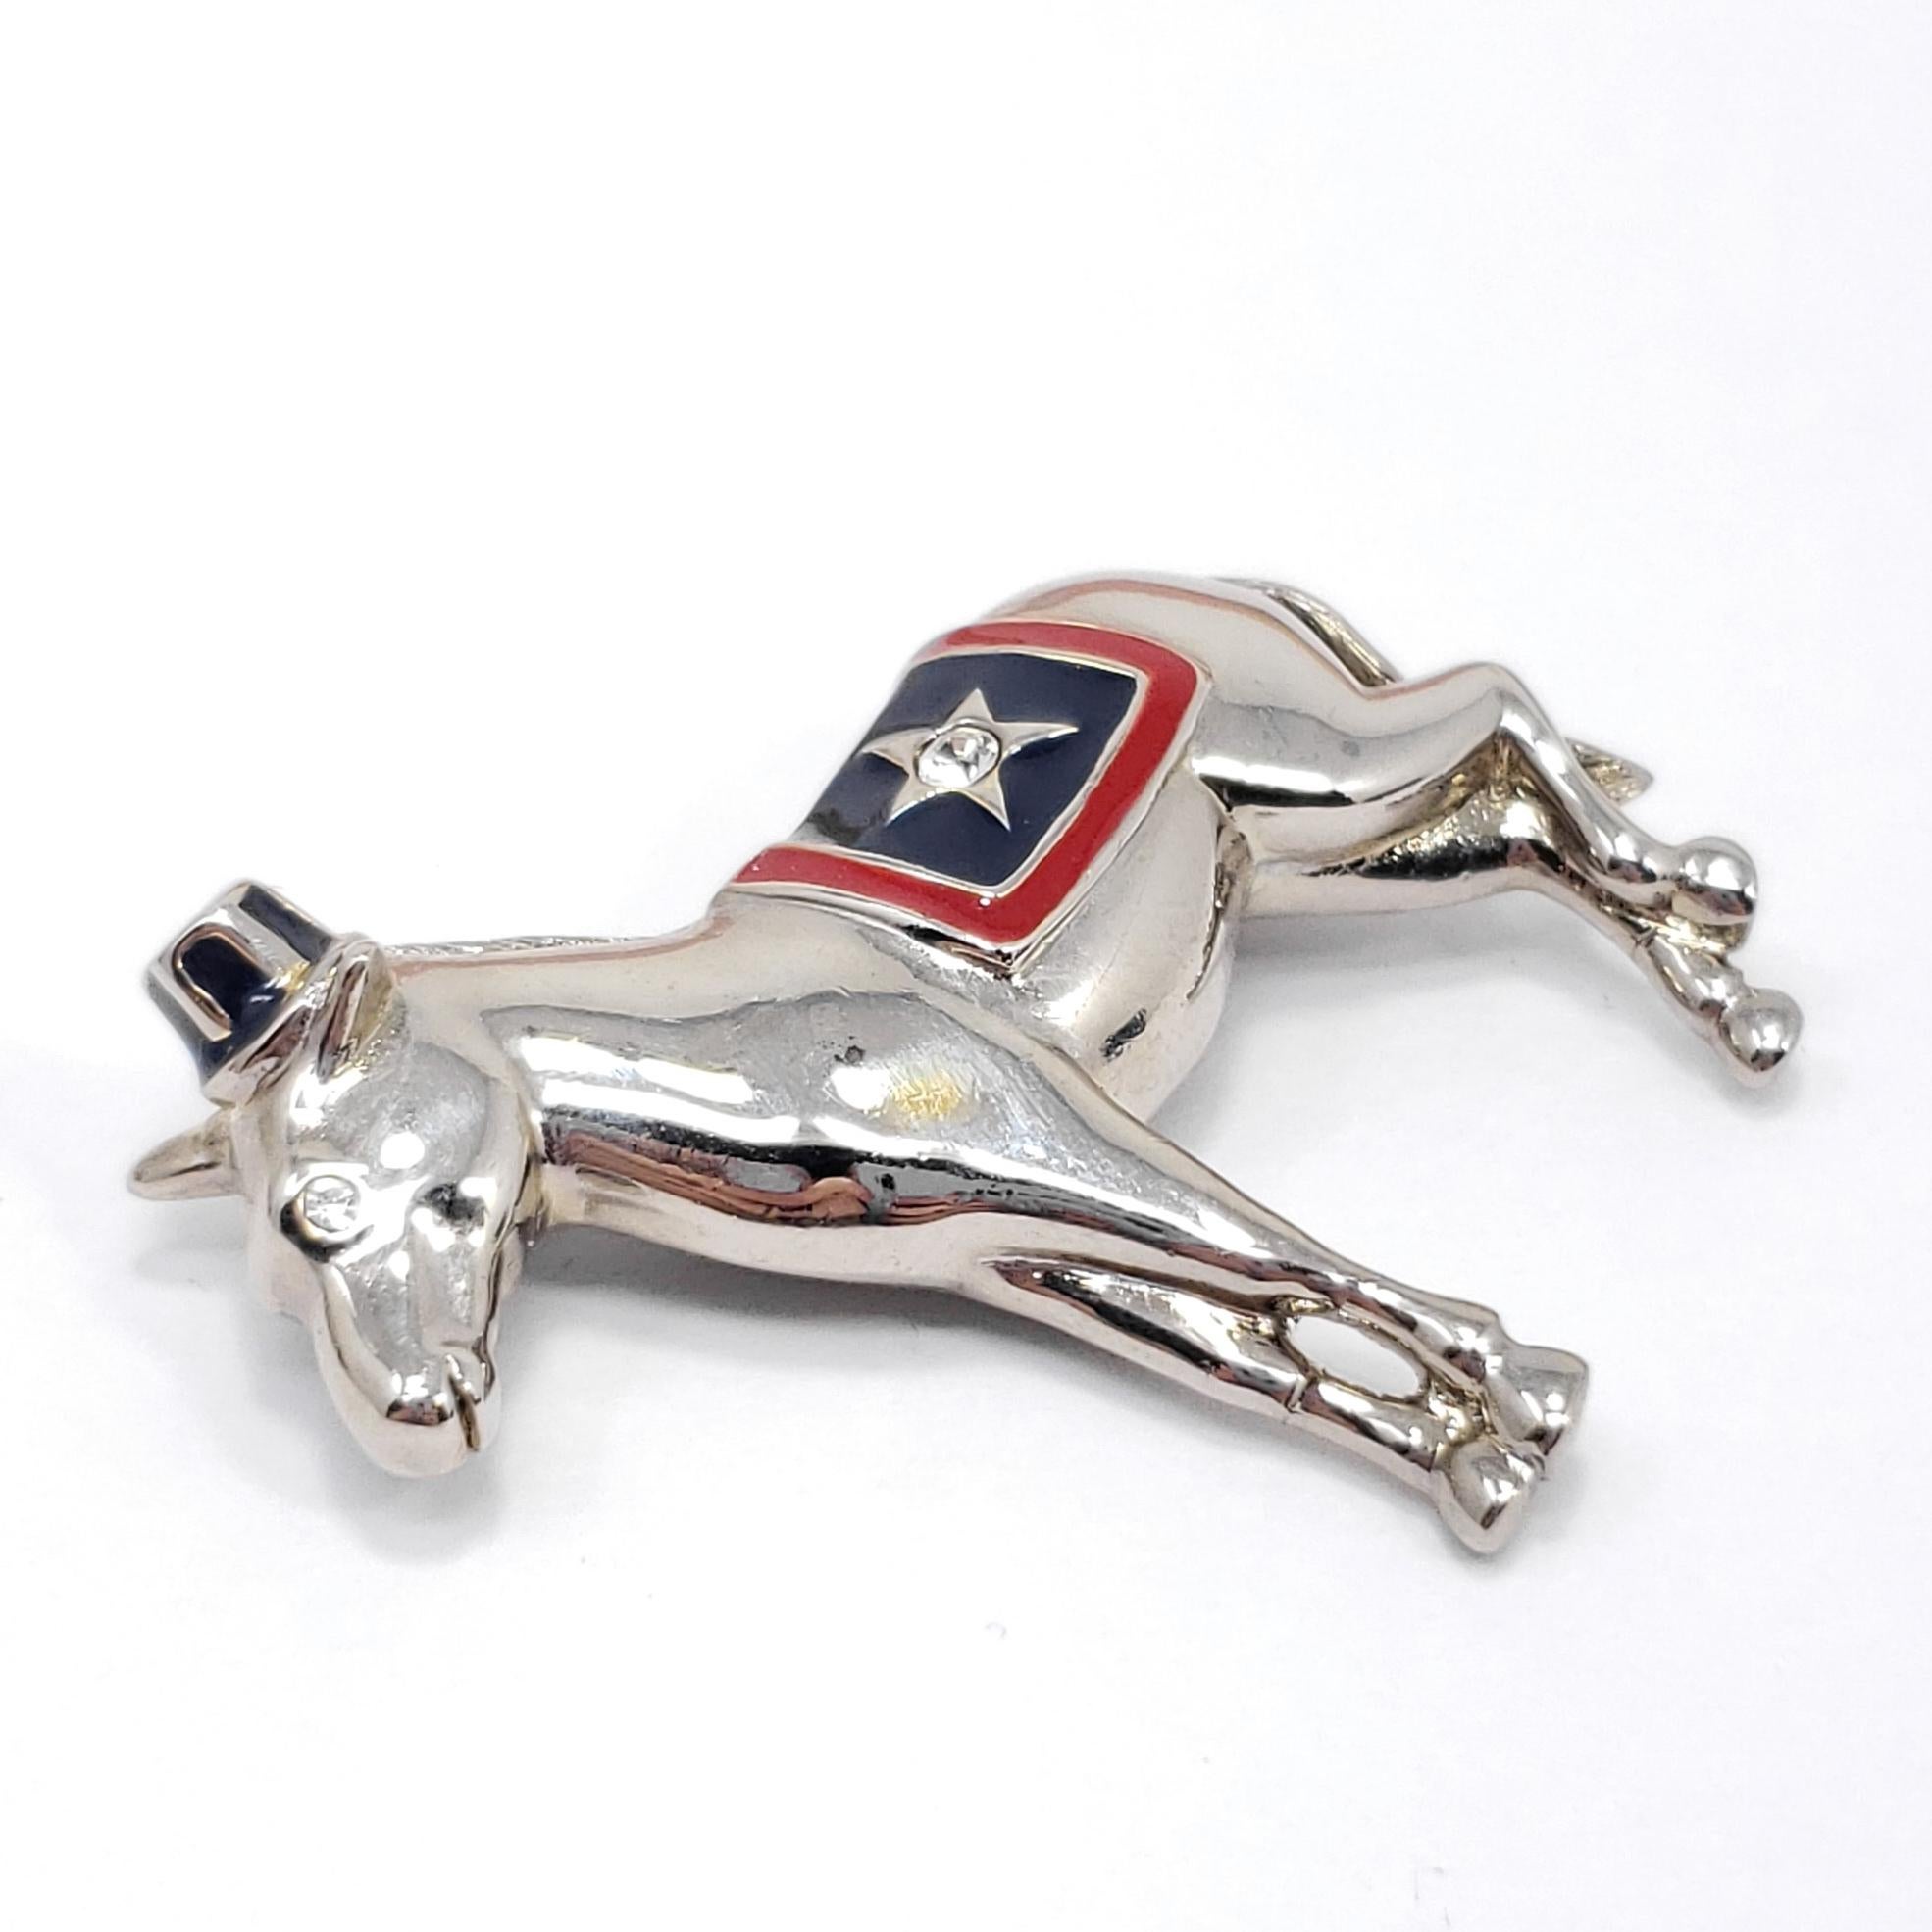 This patriotic pin features a silver-tone donkey, accented with clear crystals and red & blue enamel. By Monet.

Marks / hallmarks / etc: Monet